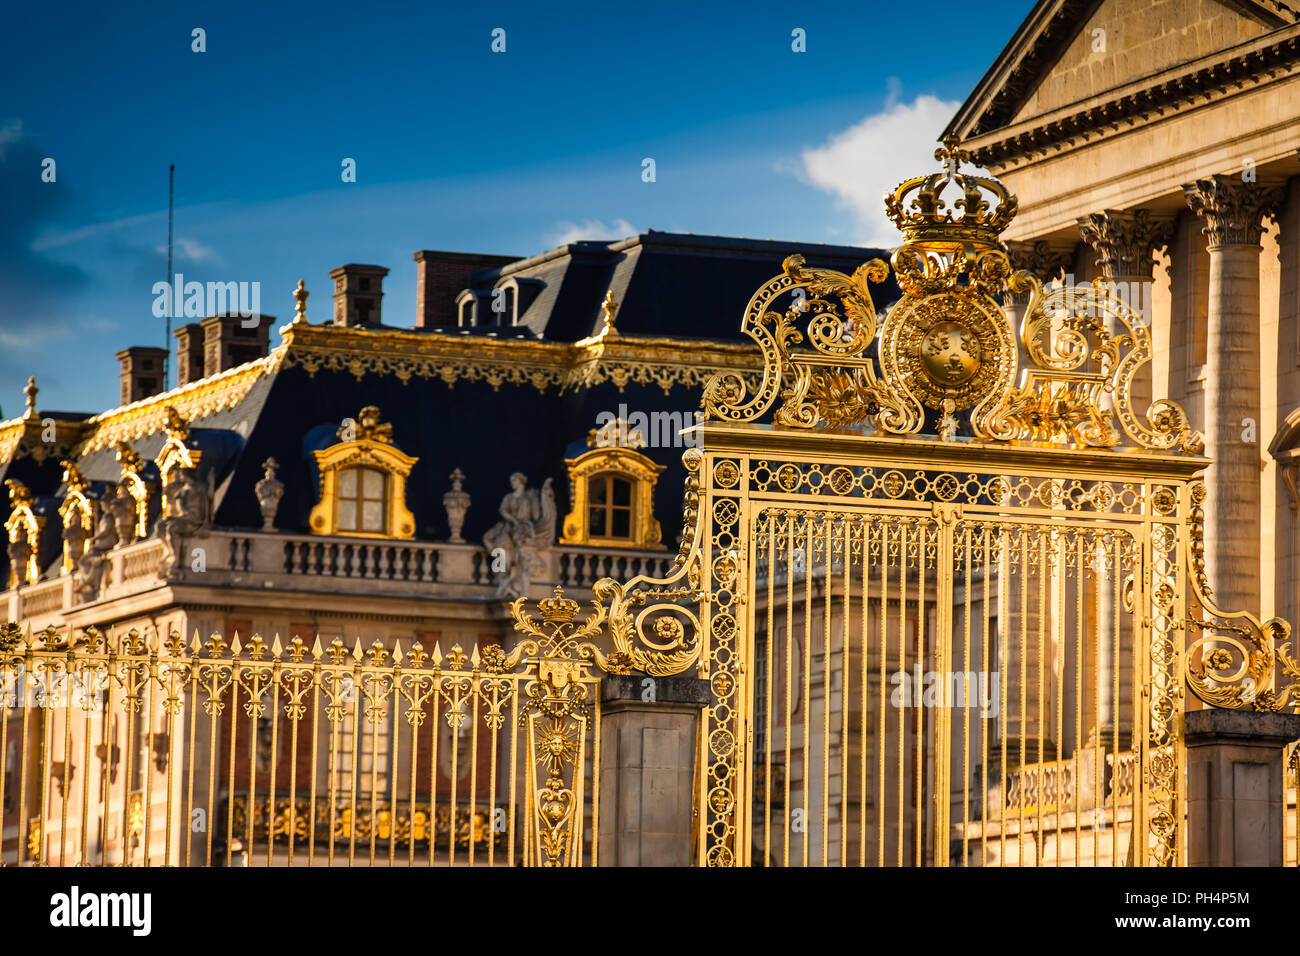 The Versailles Palace in a freezing winter day just before spring Stock Photo